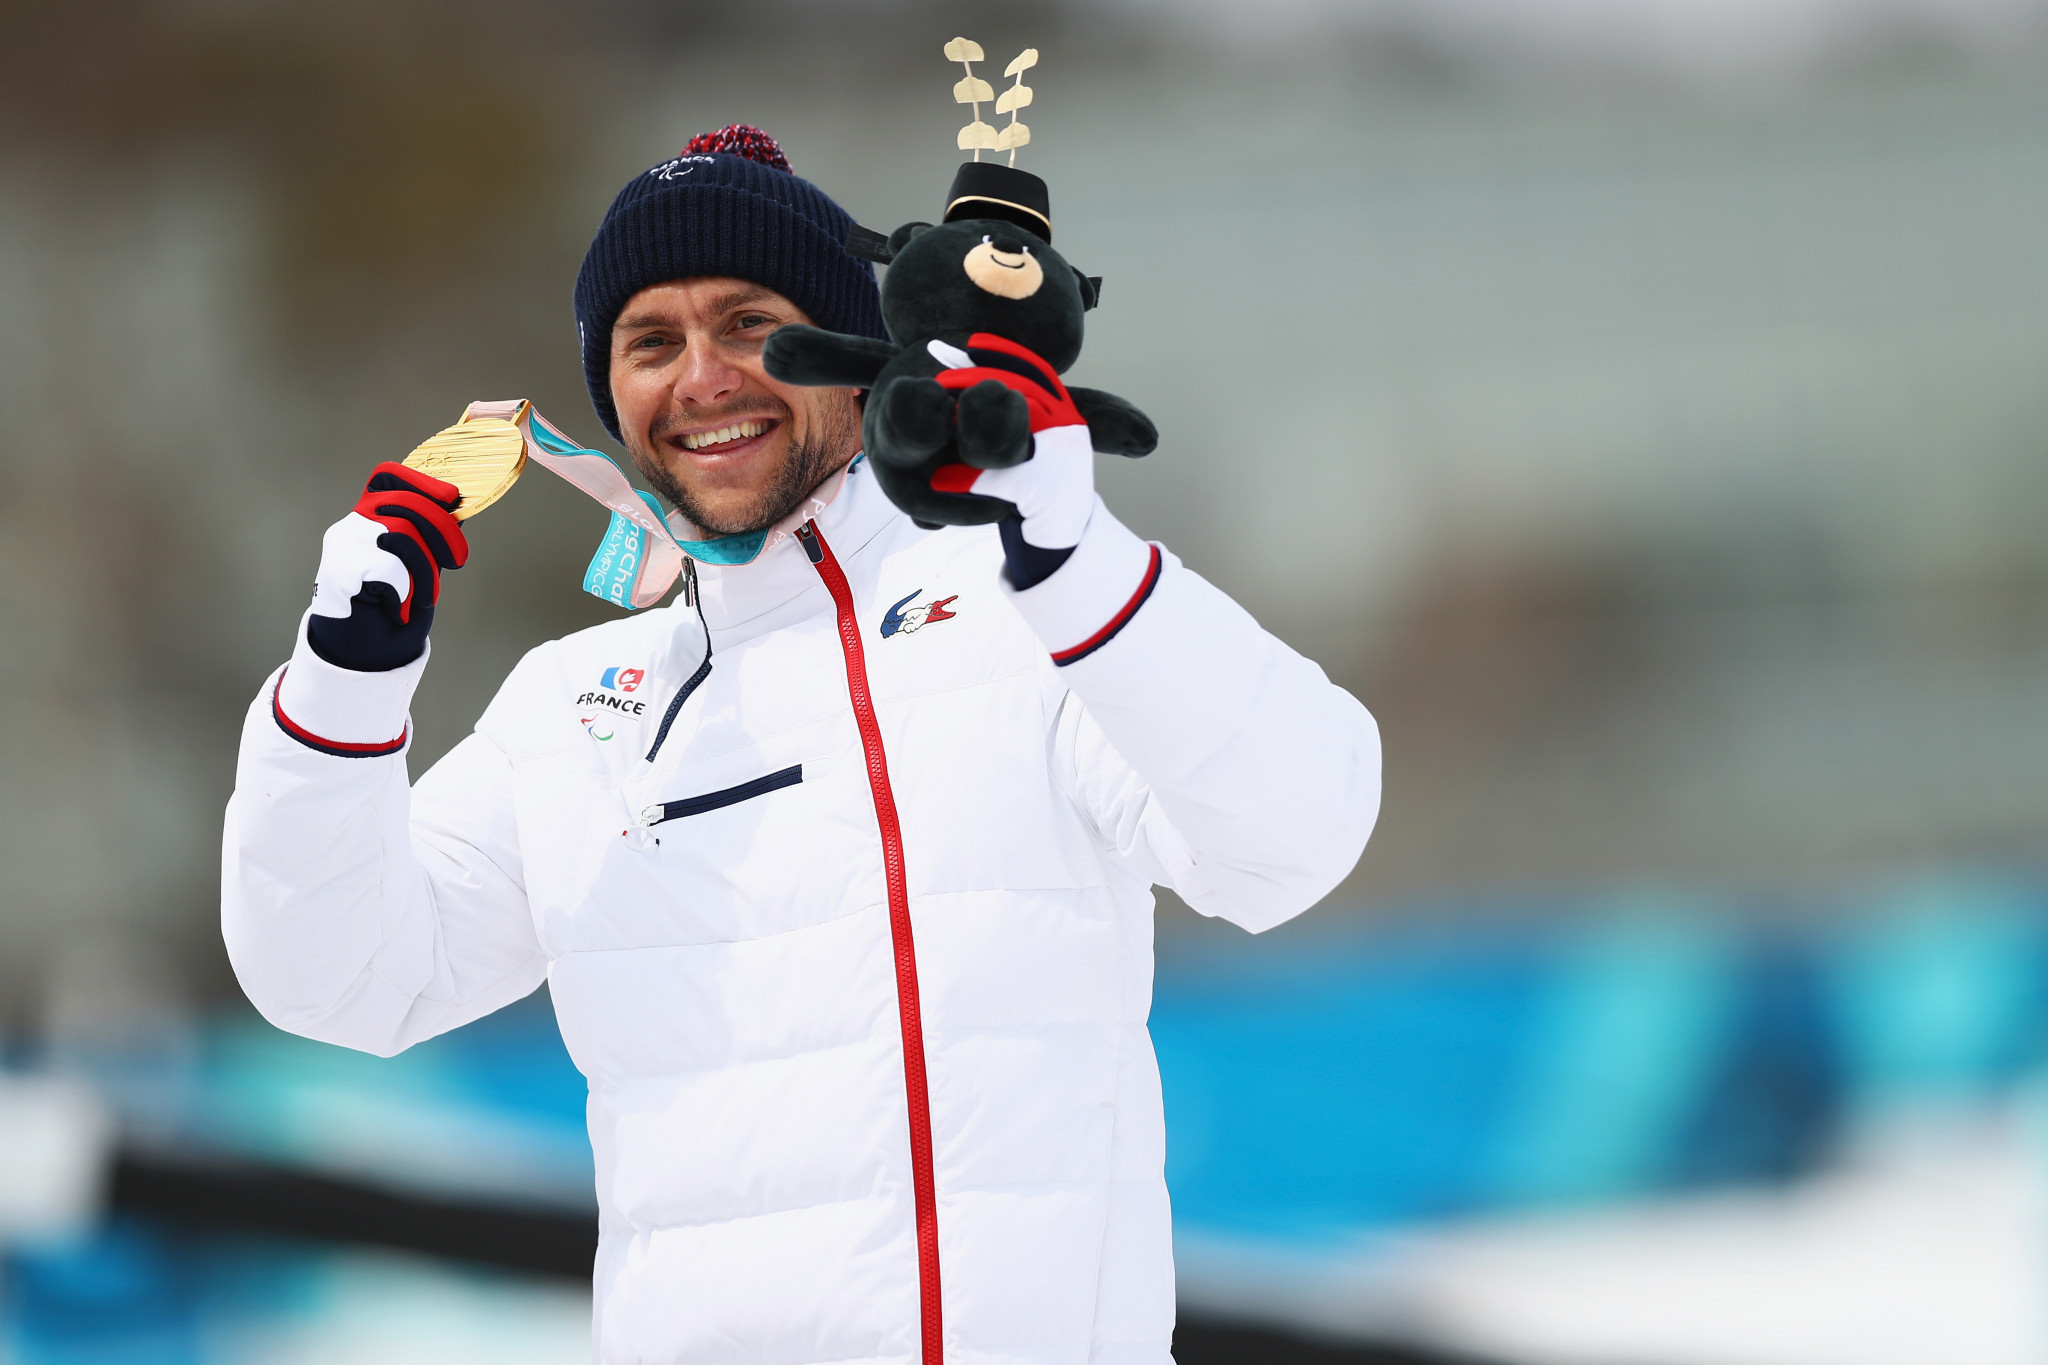 Benjamin Daviet won his fourth gold medal today at the World Para Nordic Skiing Championships ©Getty Images